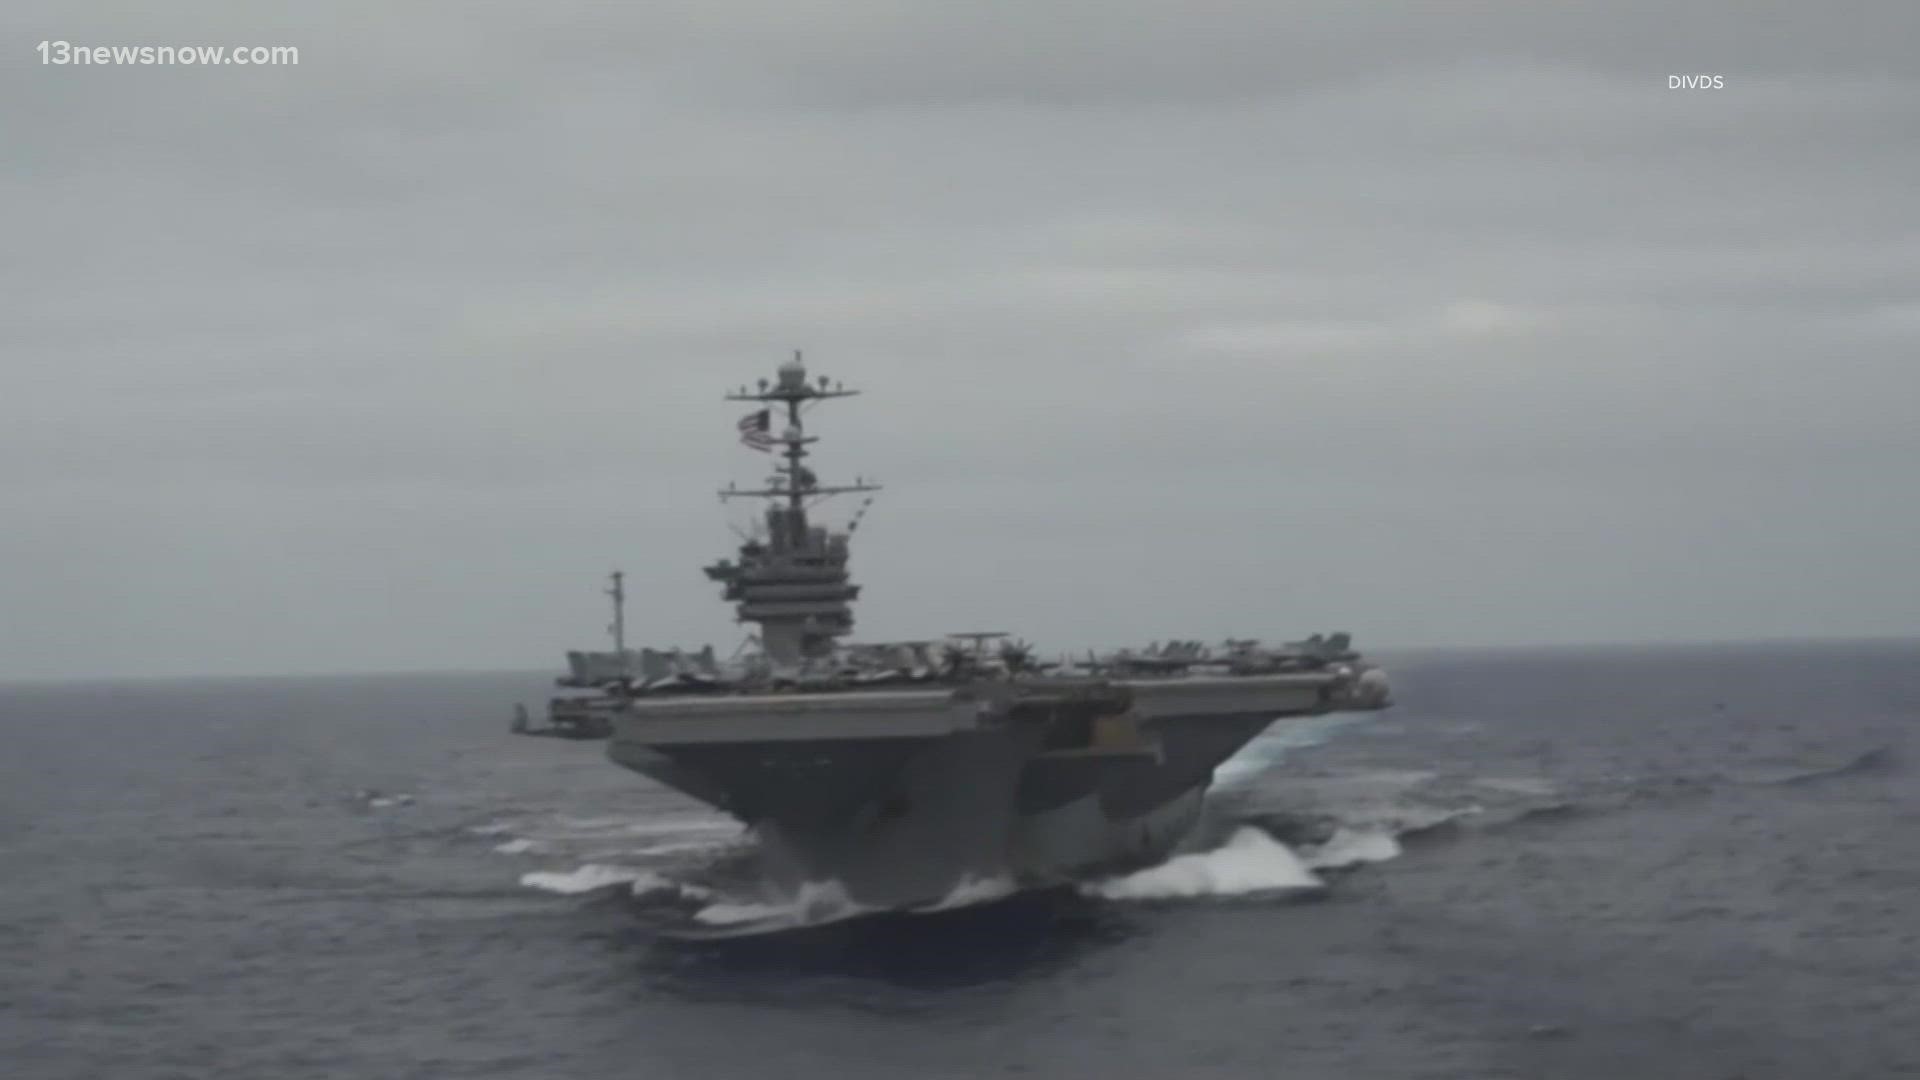 Work on USS George Washington was supposed to be done in 2021, but labor issues caused by the pandemic have caused delays.